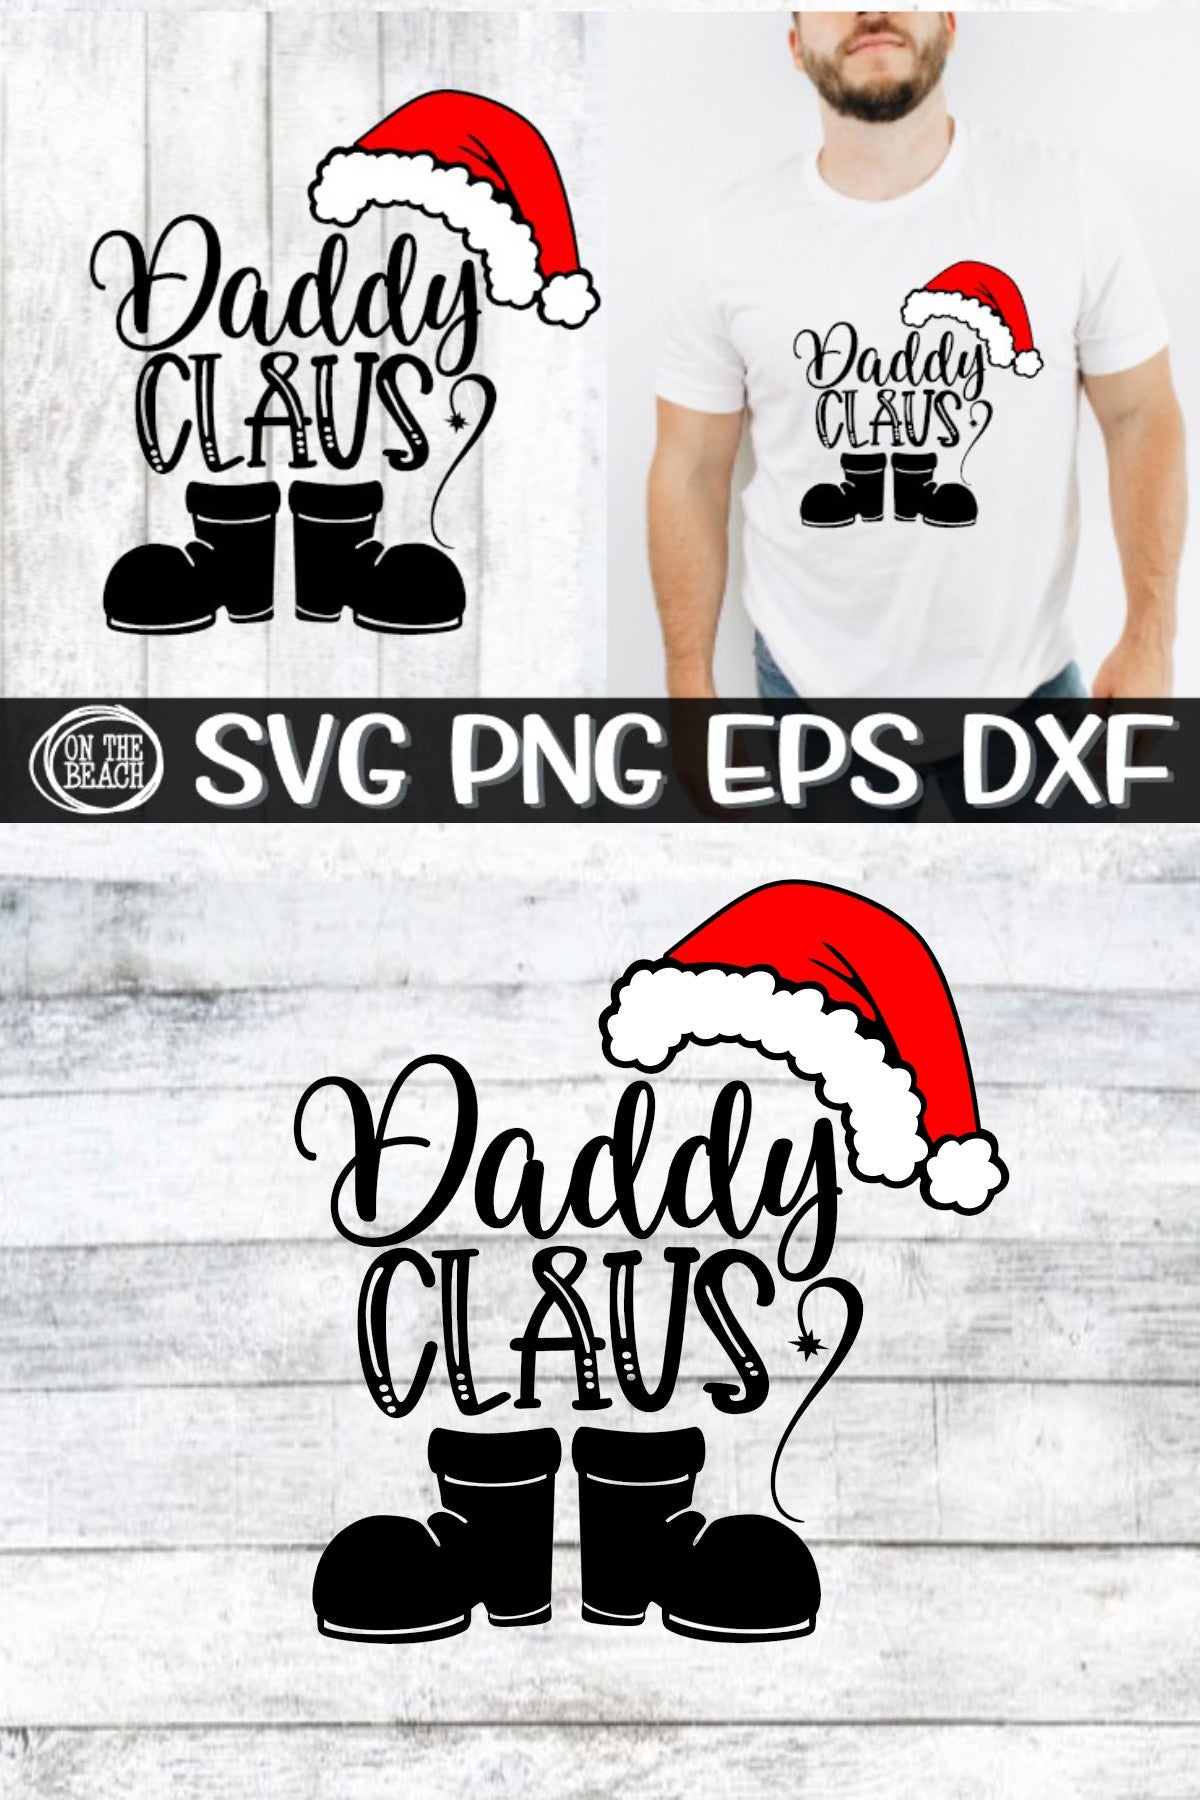 Daddy Claus - SVG PNG EPS DXF